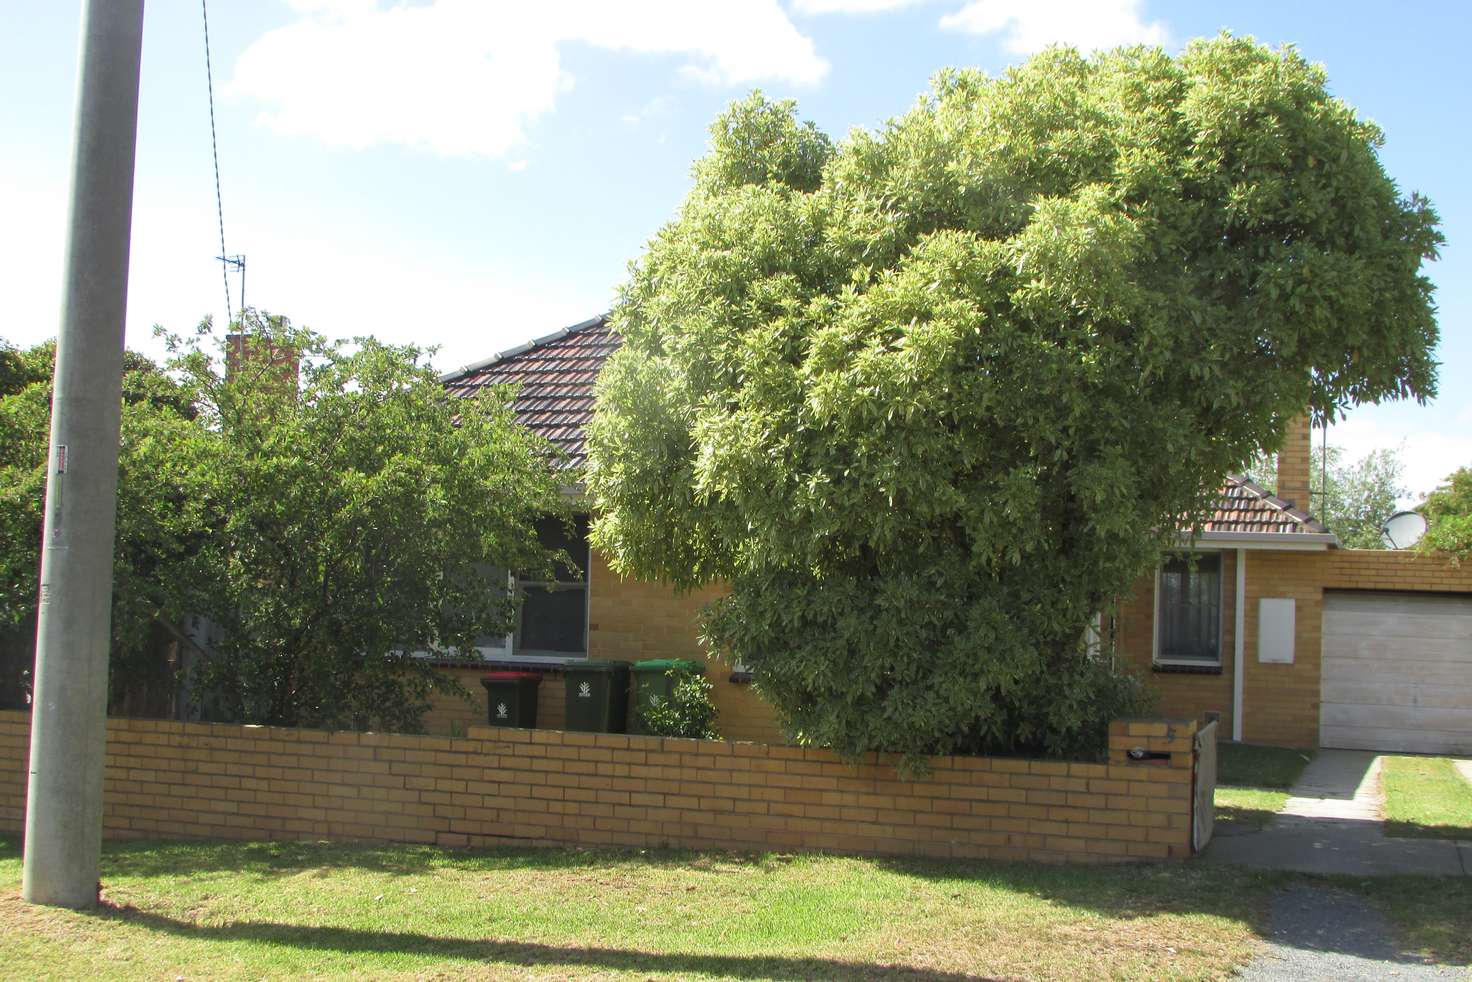 Main view of Homely house listing, 5 Dalmahoy St, Bairnsdale VIC 3875